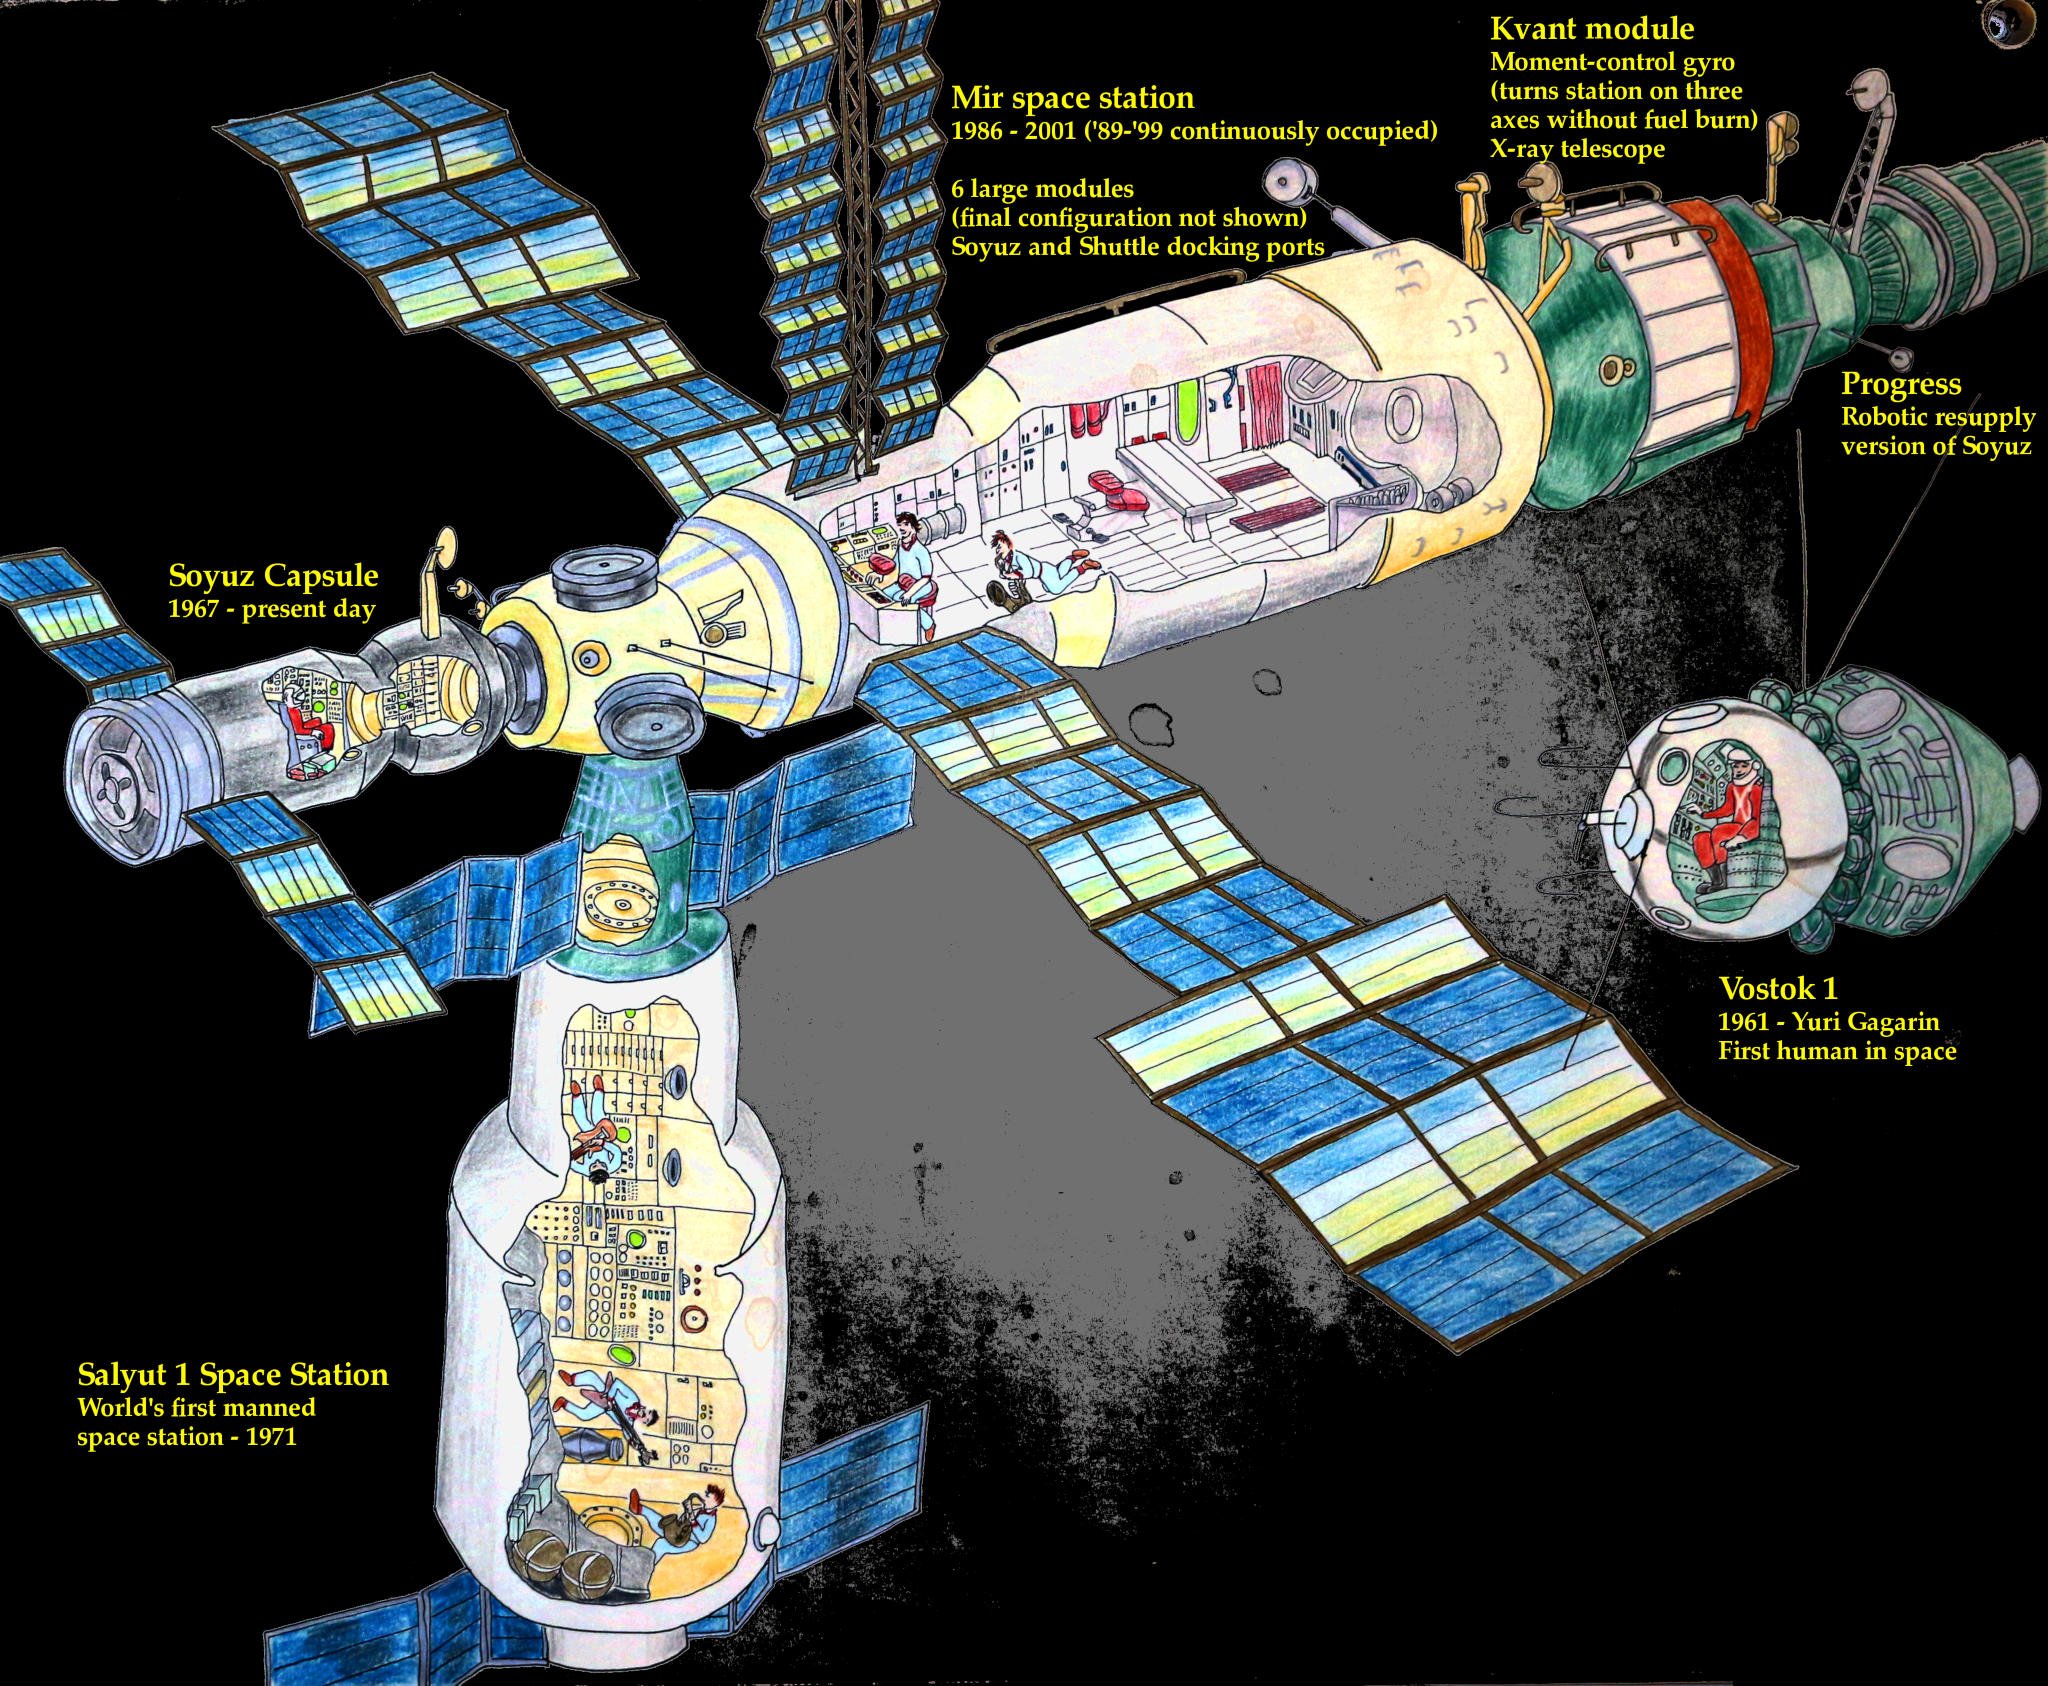 The Hot Mess That Was the Mir Space Station 